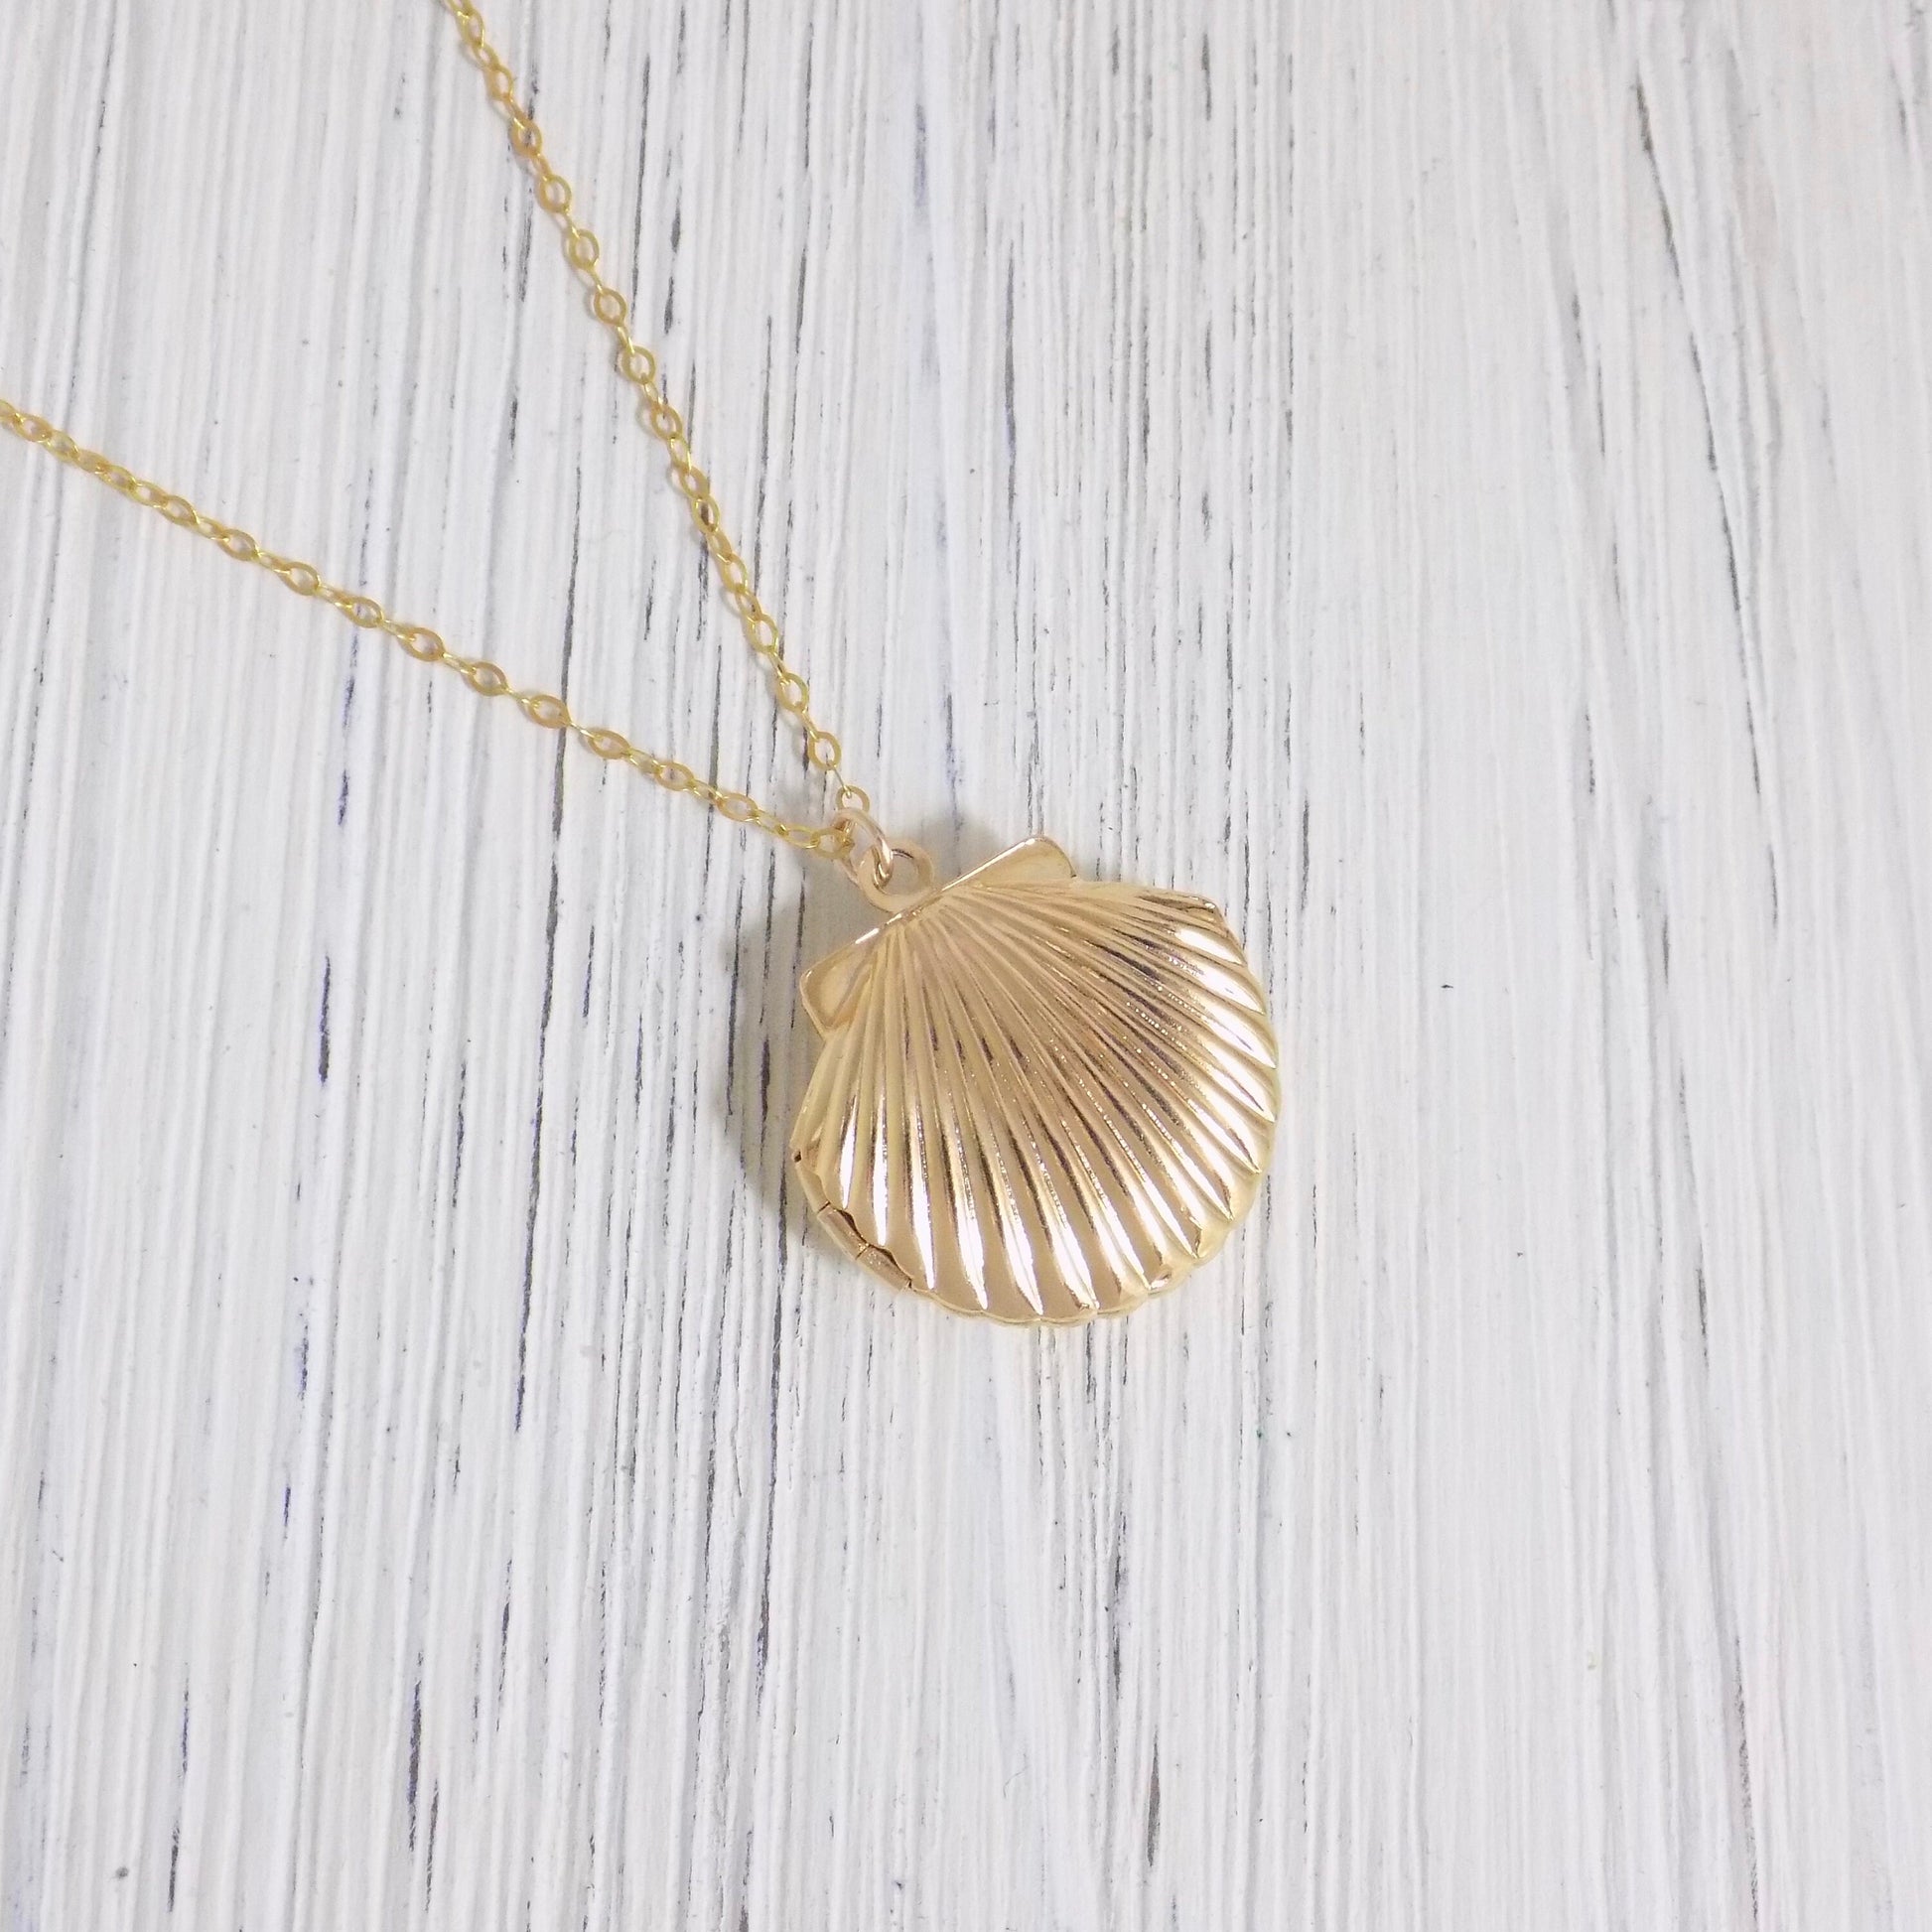 Shell Necklace - Gold Locket Necklace